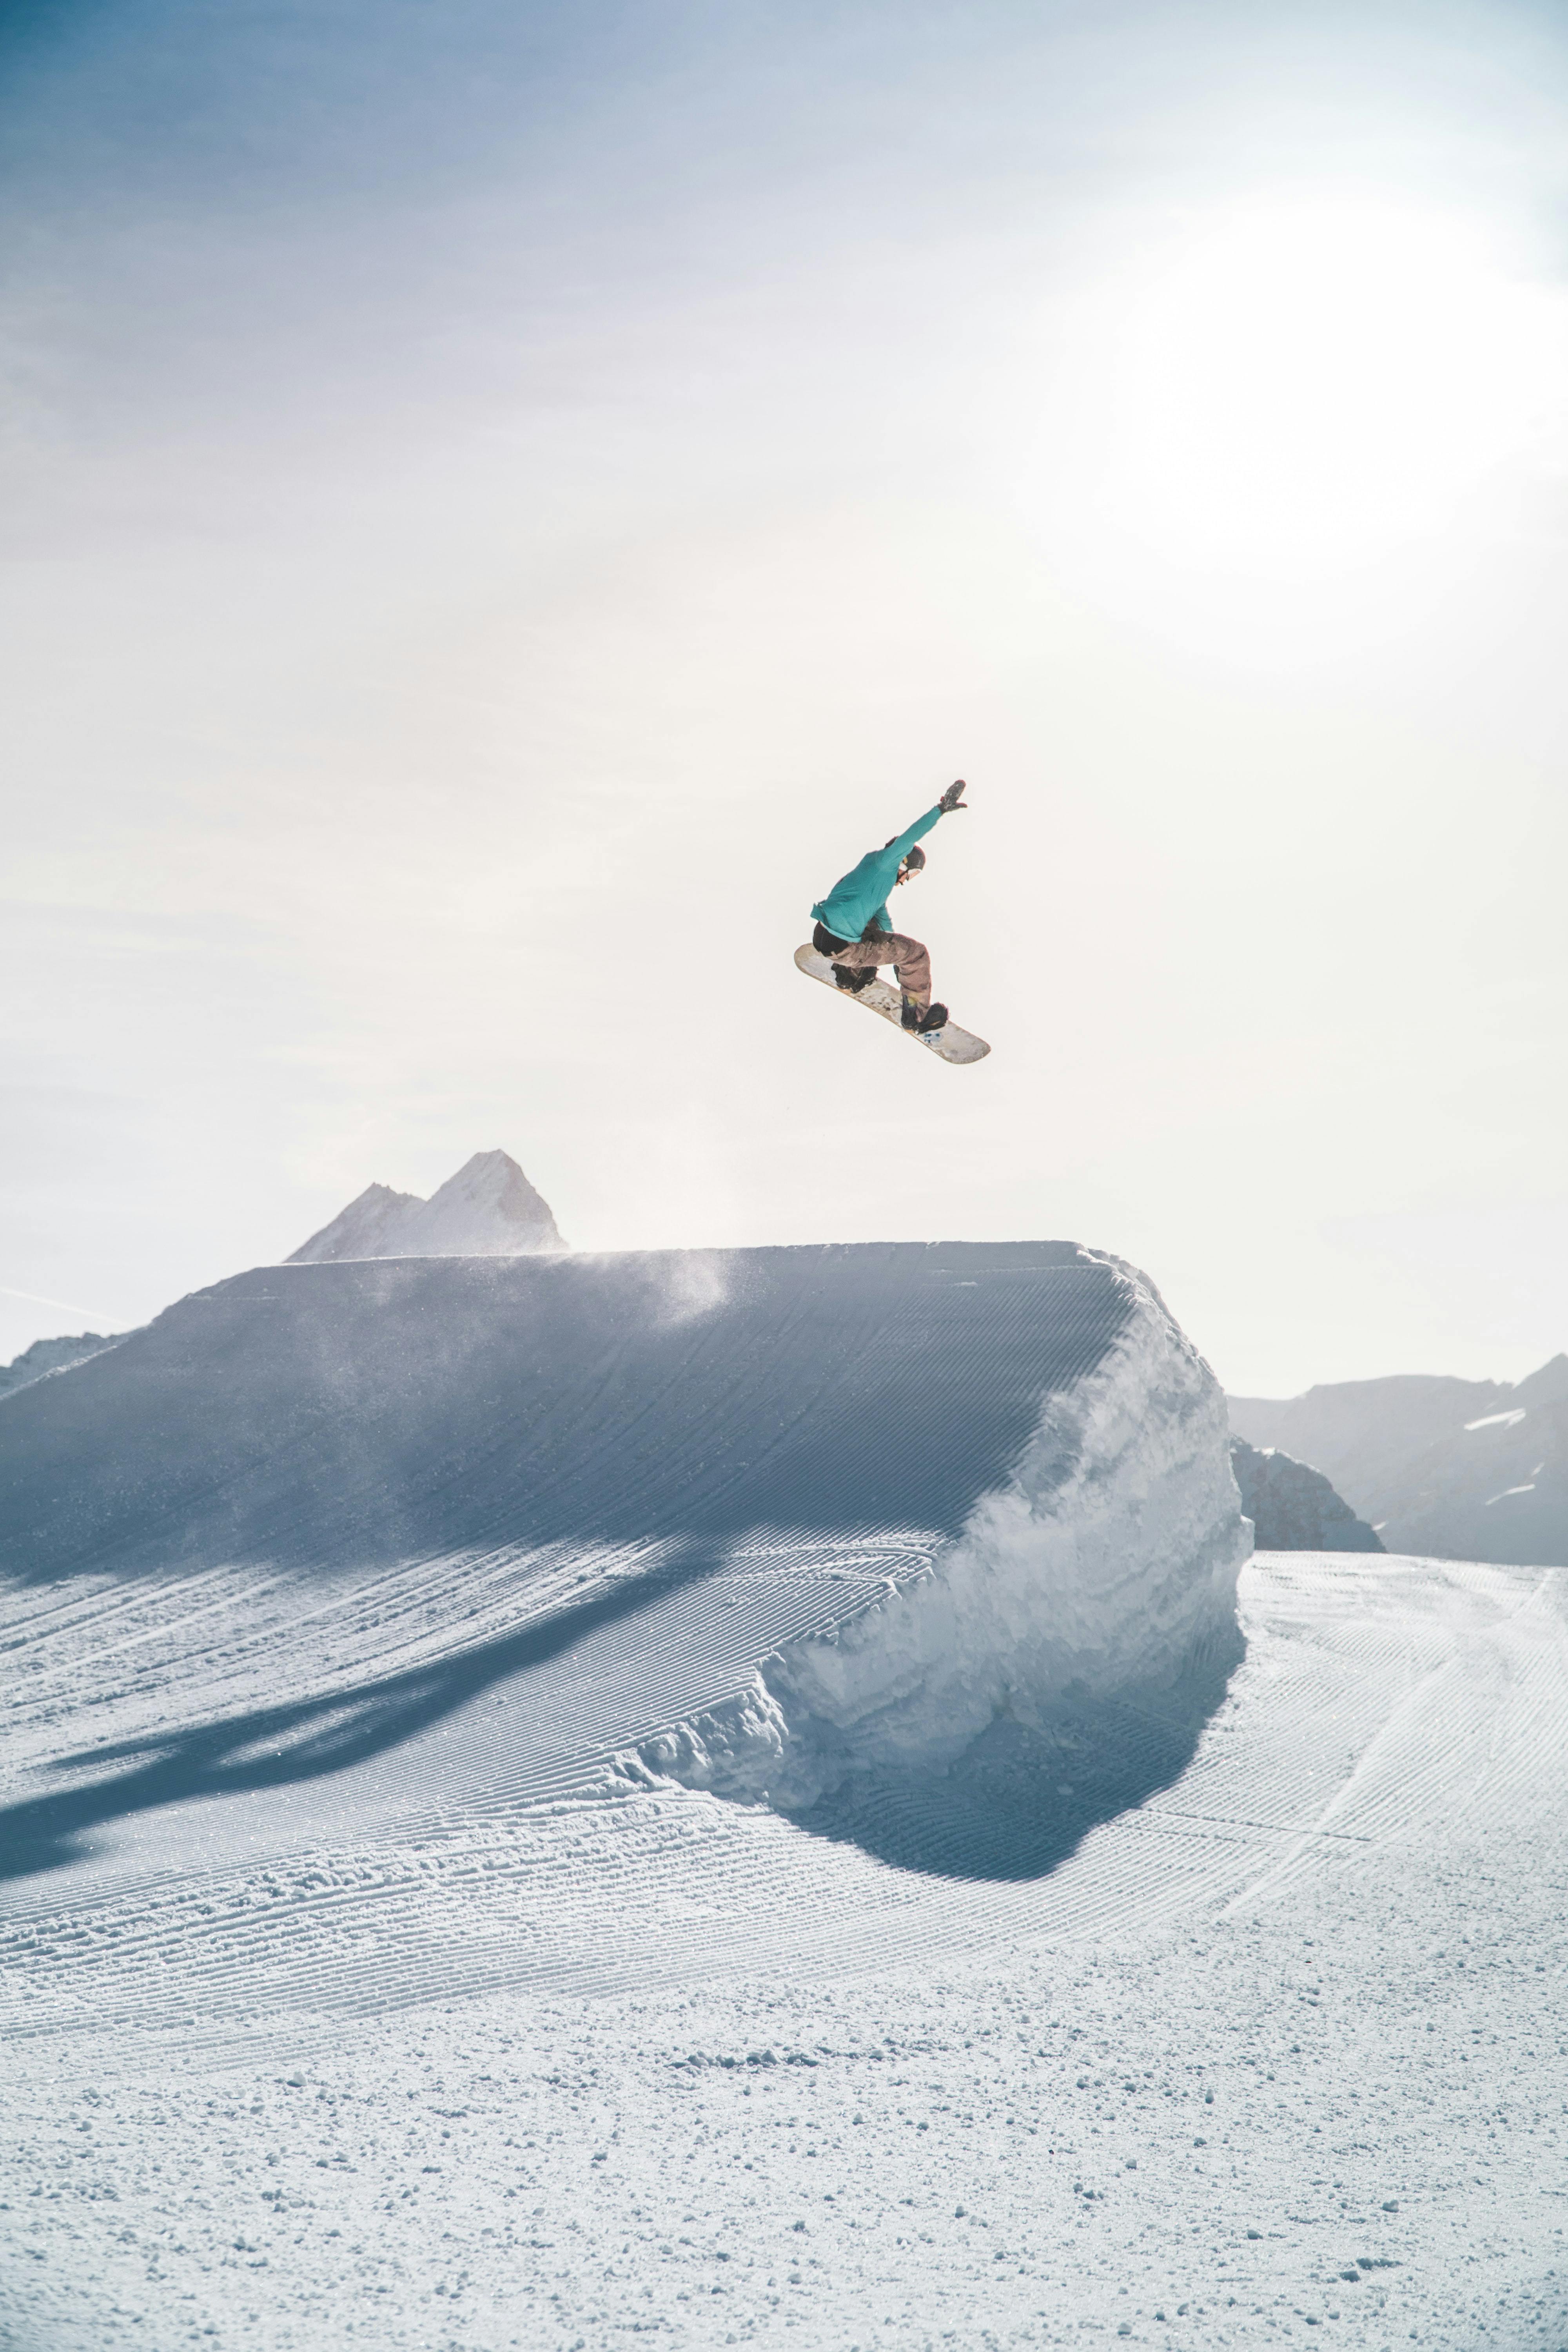 Snowboarder is in the air after riding off a tall jump. He grabs his snowboard with one hand and the other hand is in the air. 